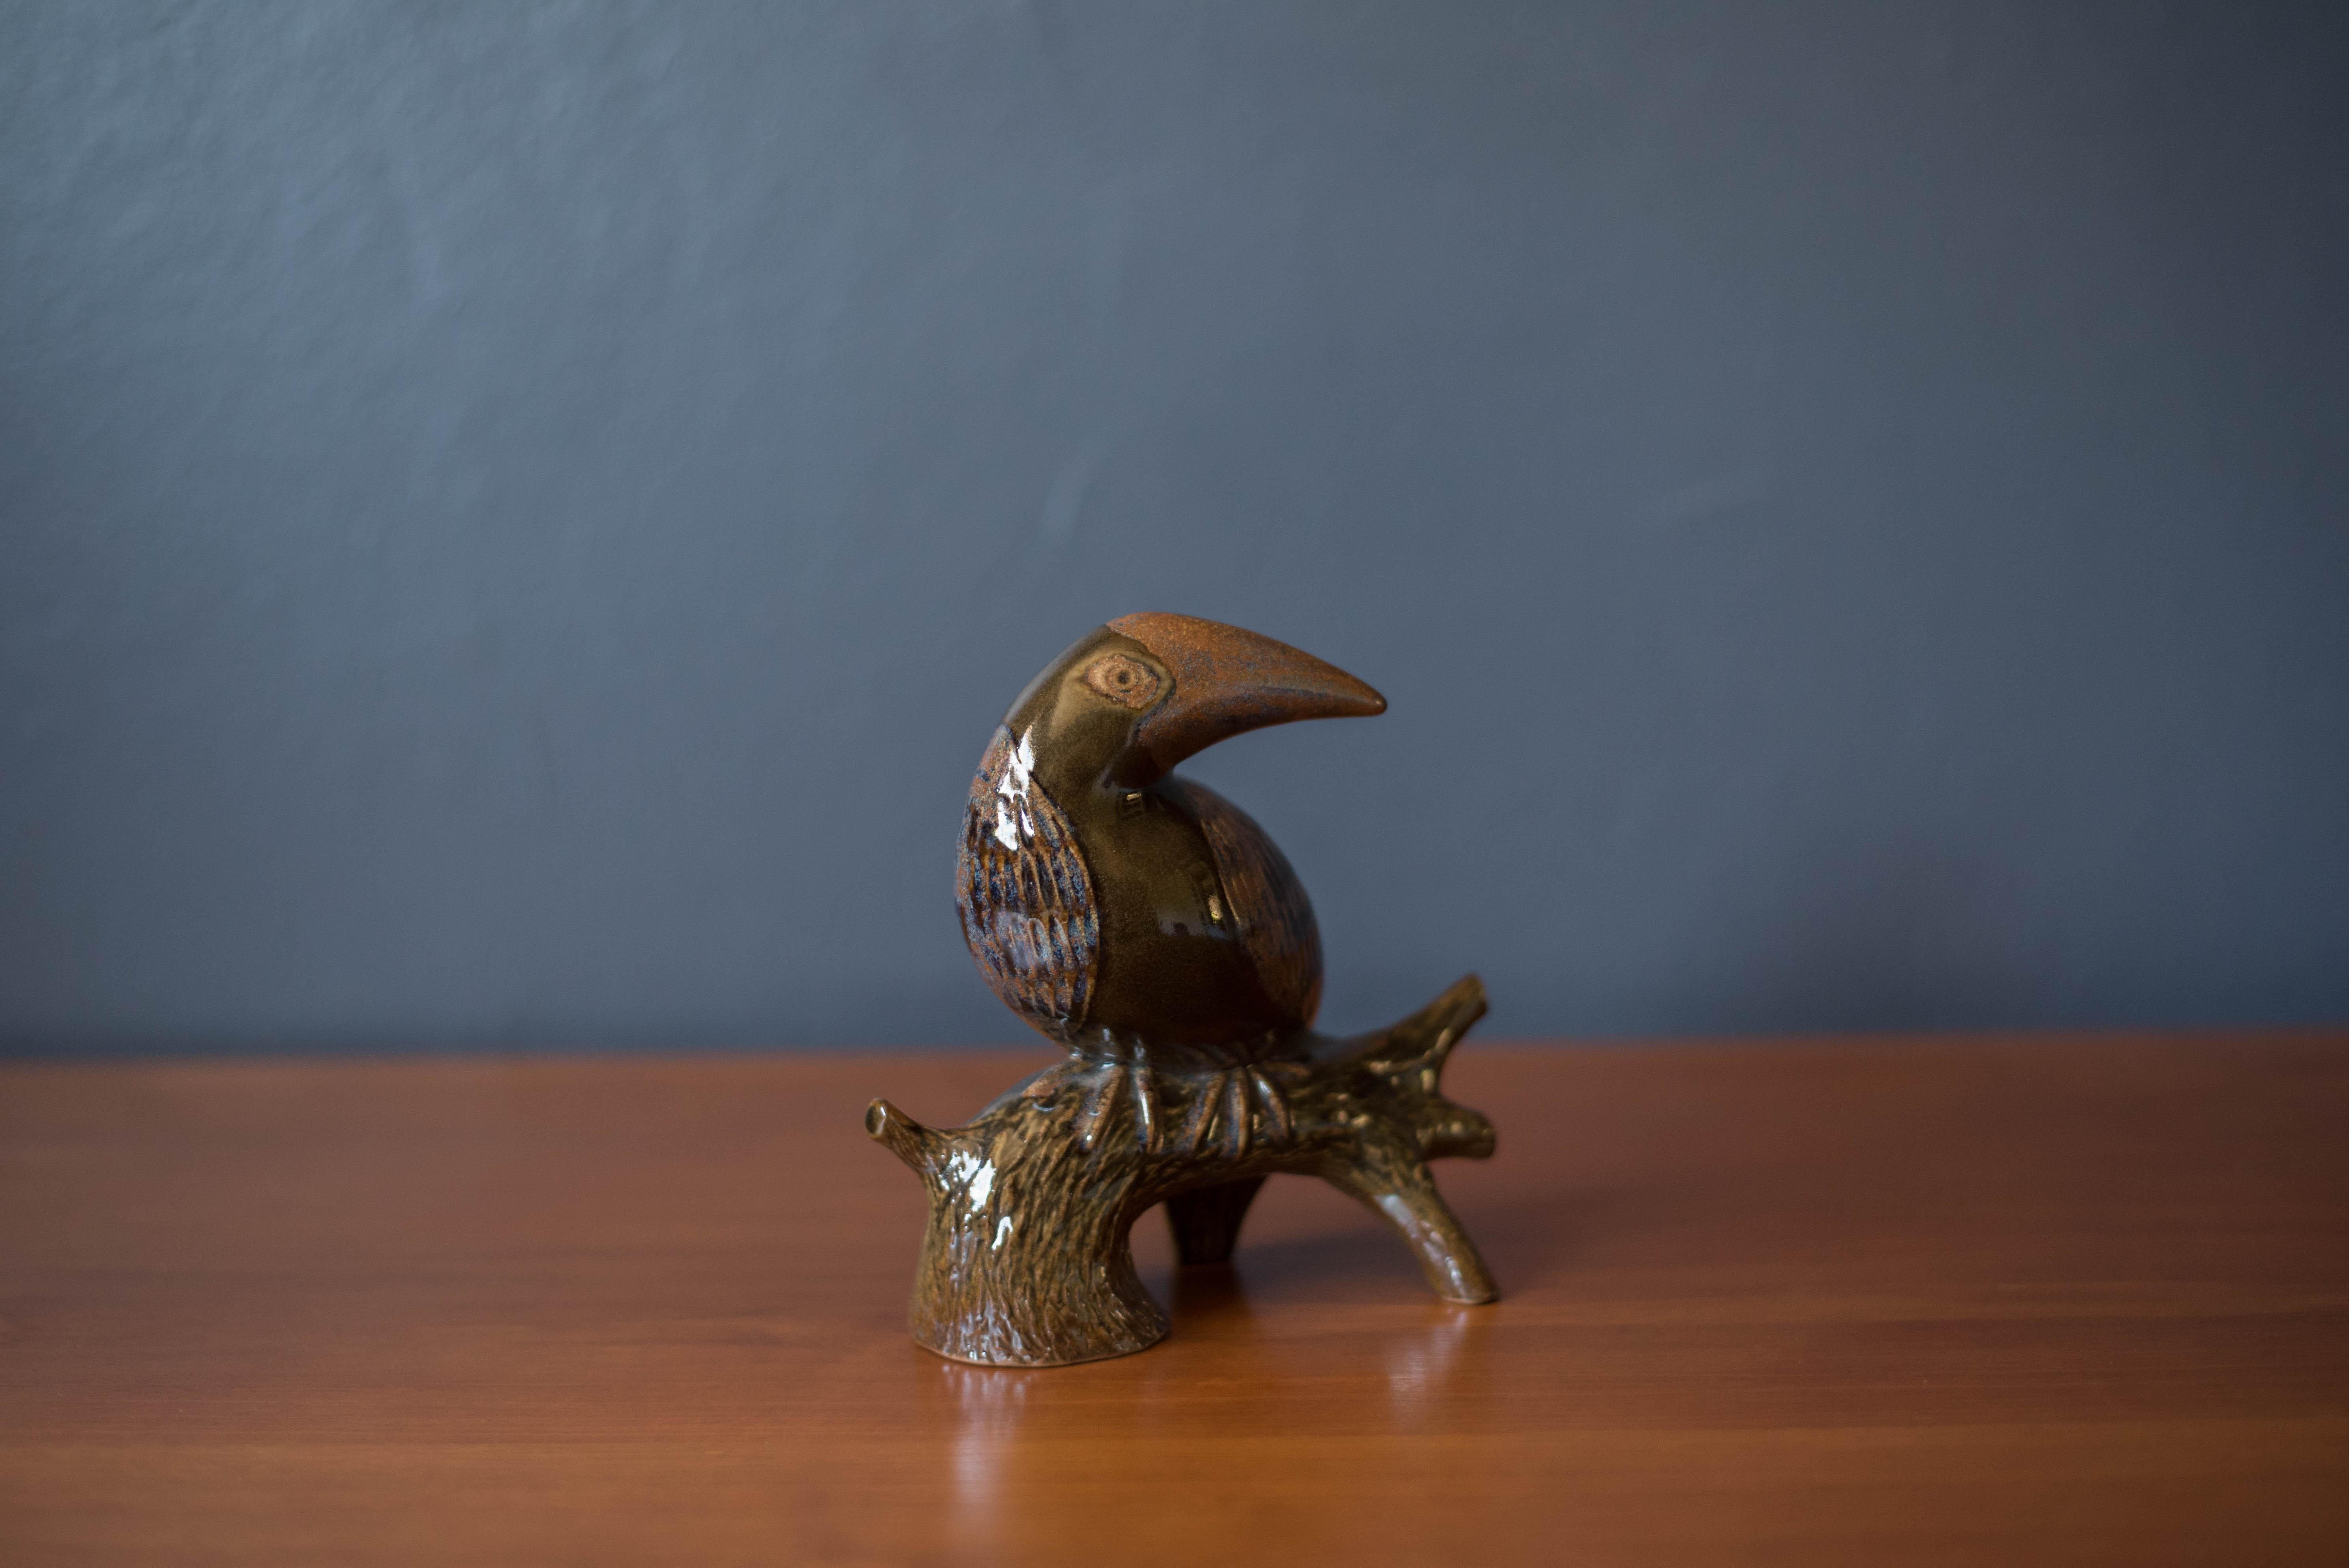 Vintage ceramic pottery stoneware zoo bird sculpture designed by Robert Maxwell circa 1960's in Venice, California. This slip-cast studio piece is reminiscent of a 